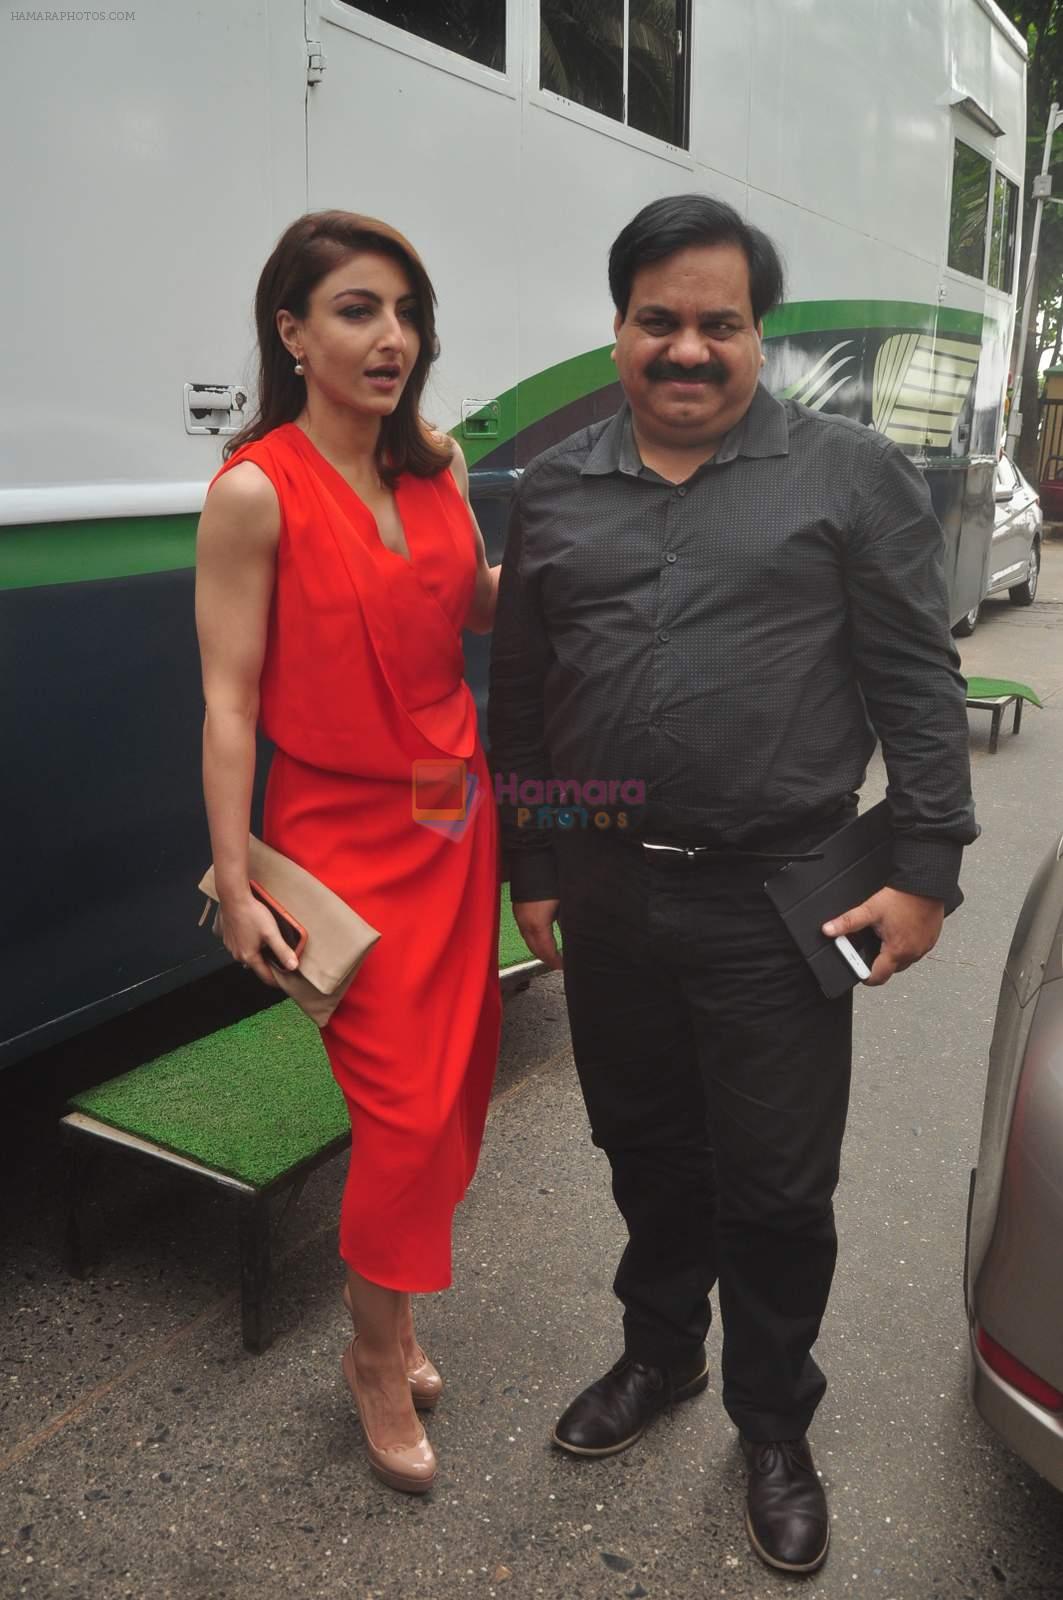 Soha Ali Khan at asian paints event on 28th Oct 2015